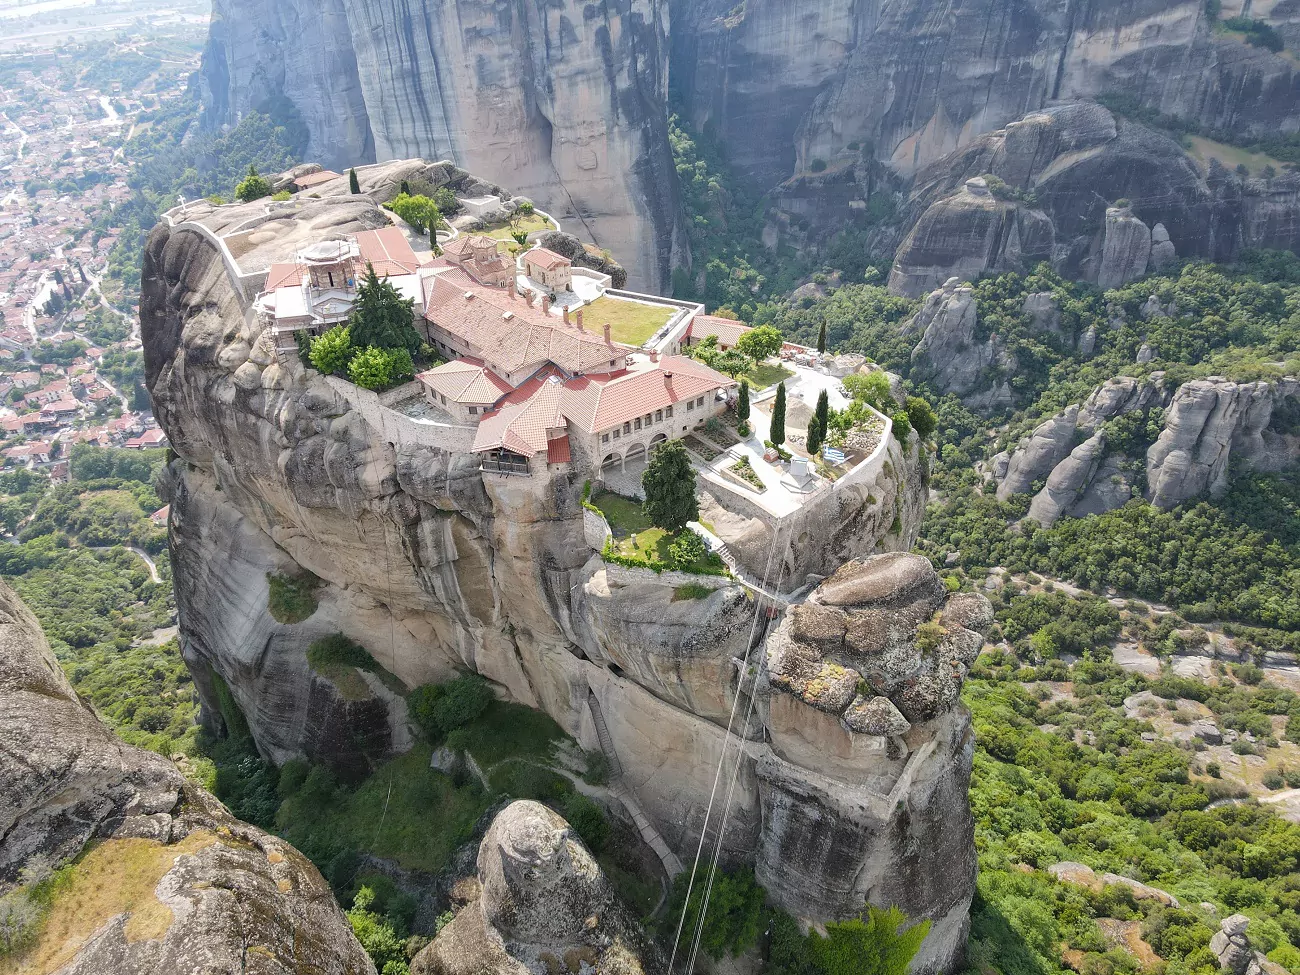 Meteora: Travel to one of the most imposing destinations in Greece